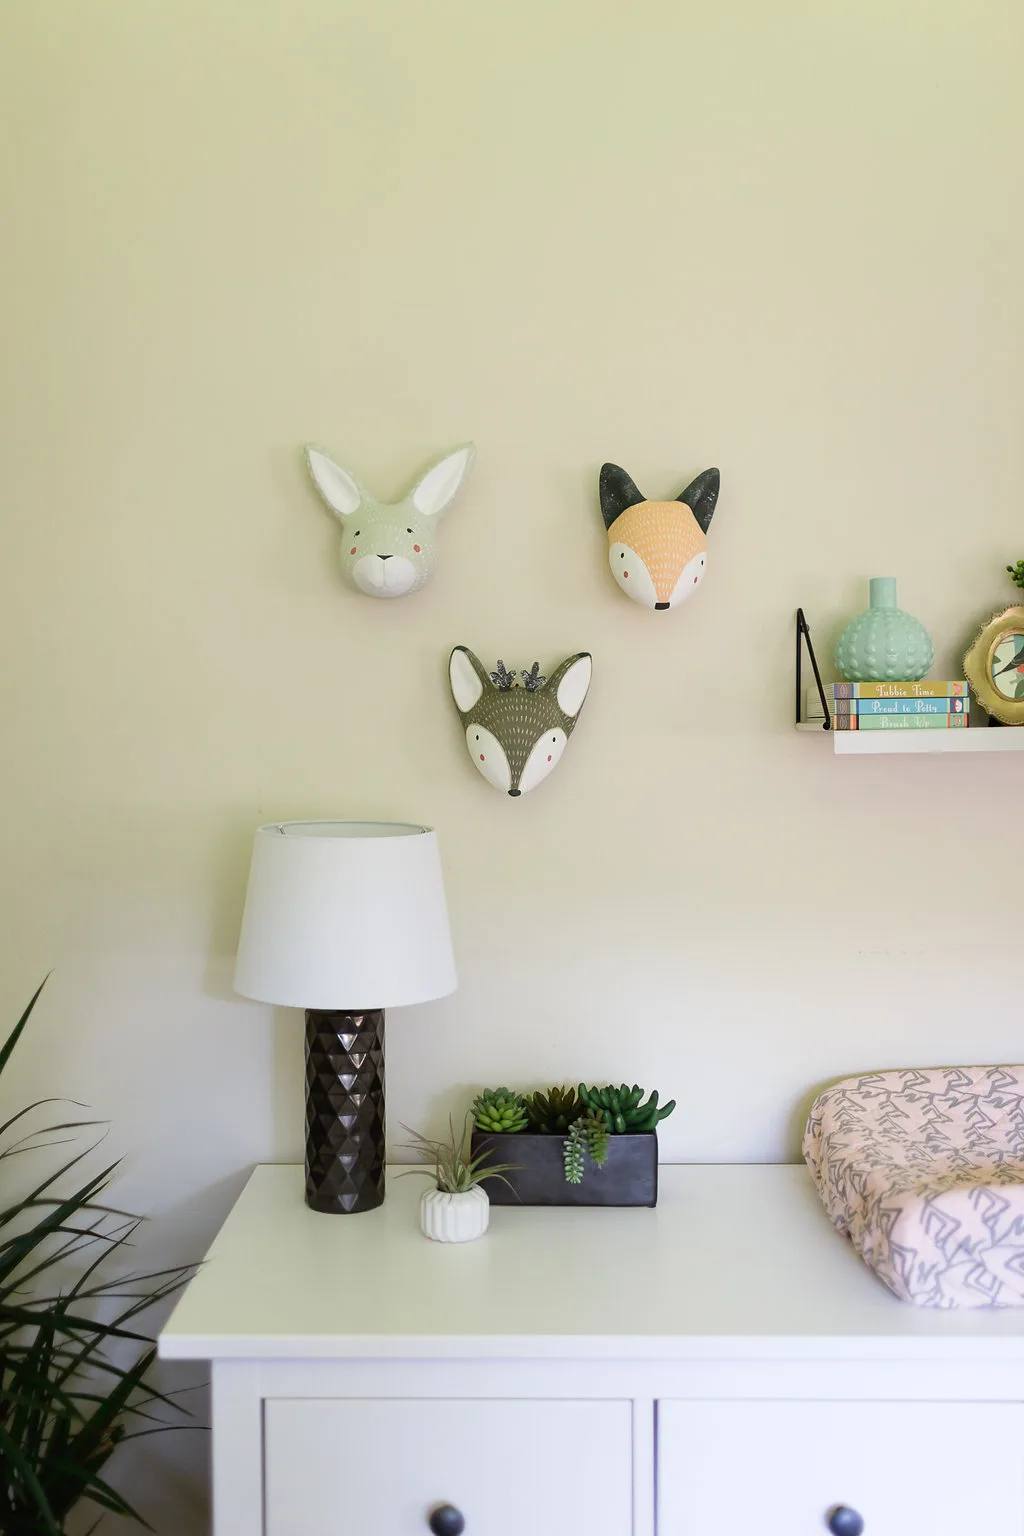 Whimsical Eclectic Nursery Dresser Vignette with Whimsical Animal Heads